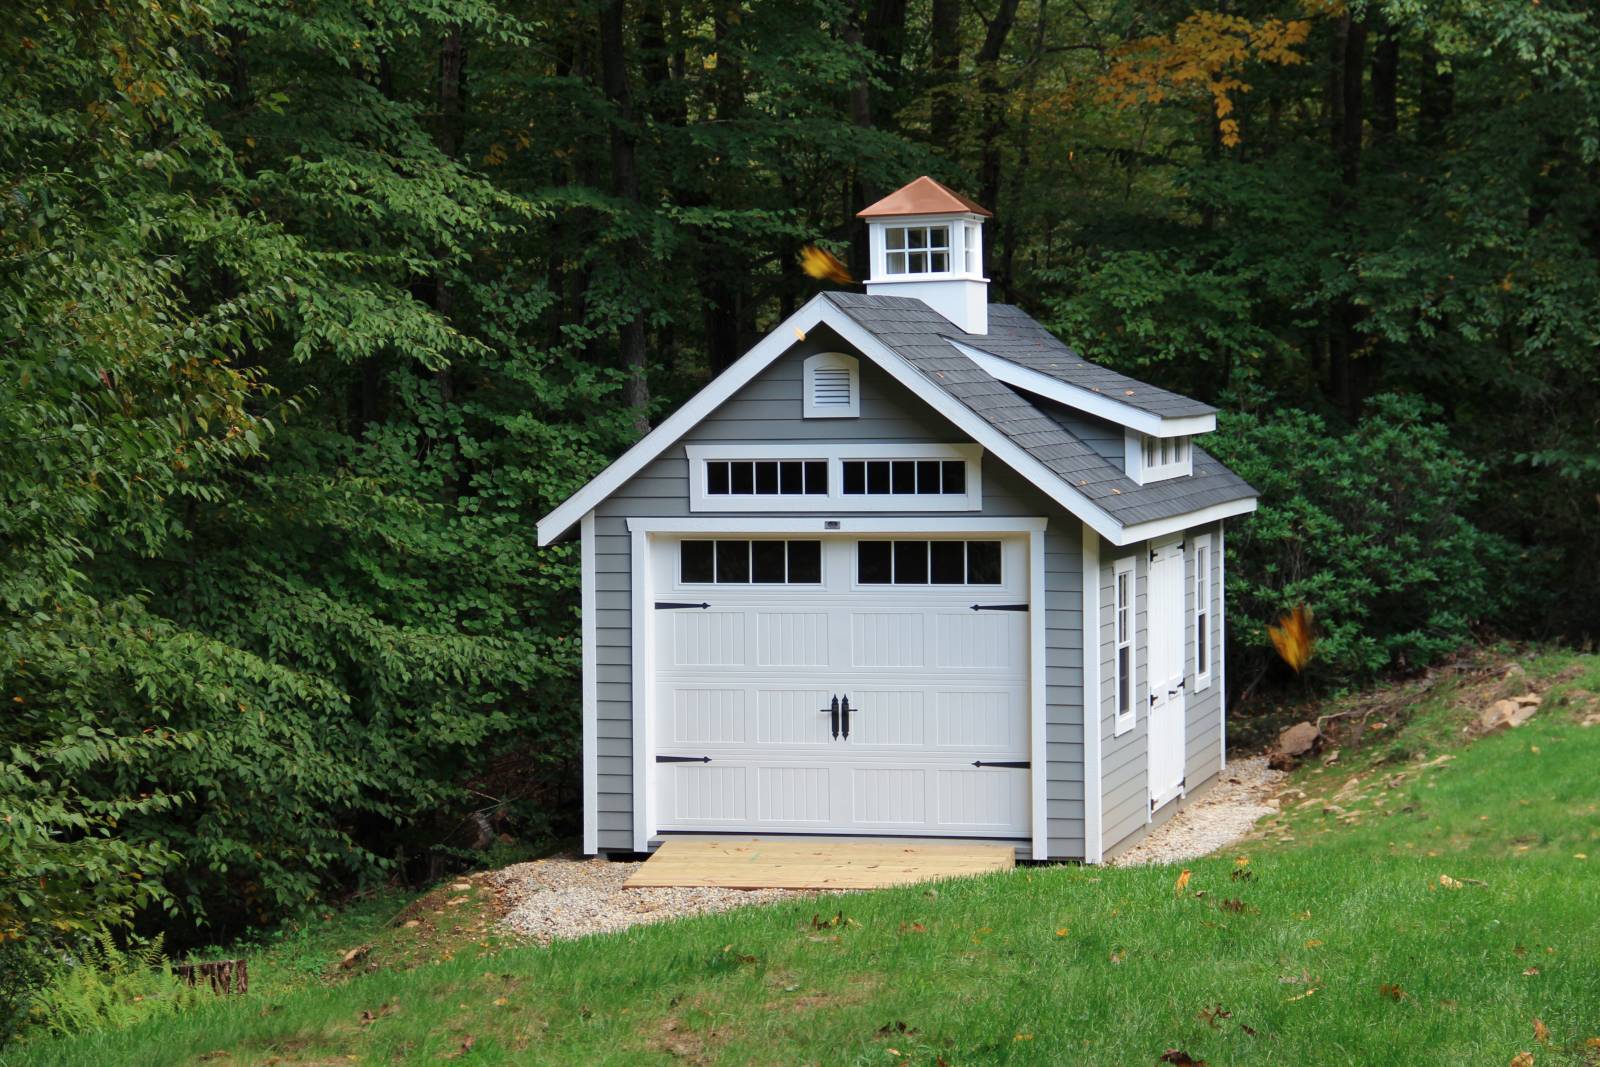 A perfect shed garage for all your storage needs